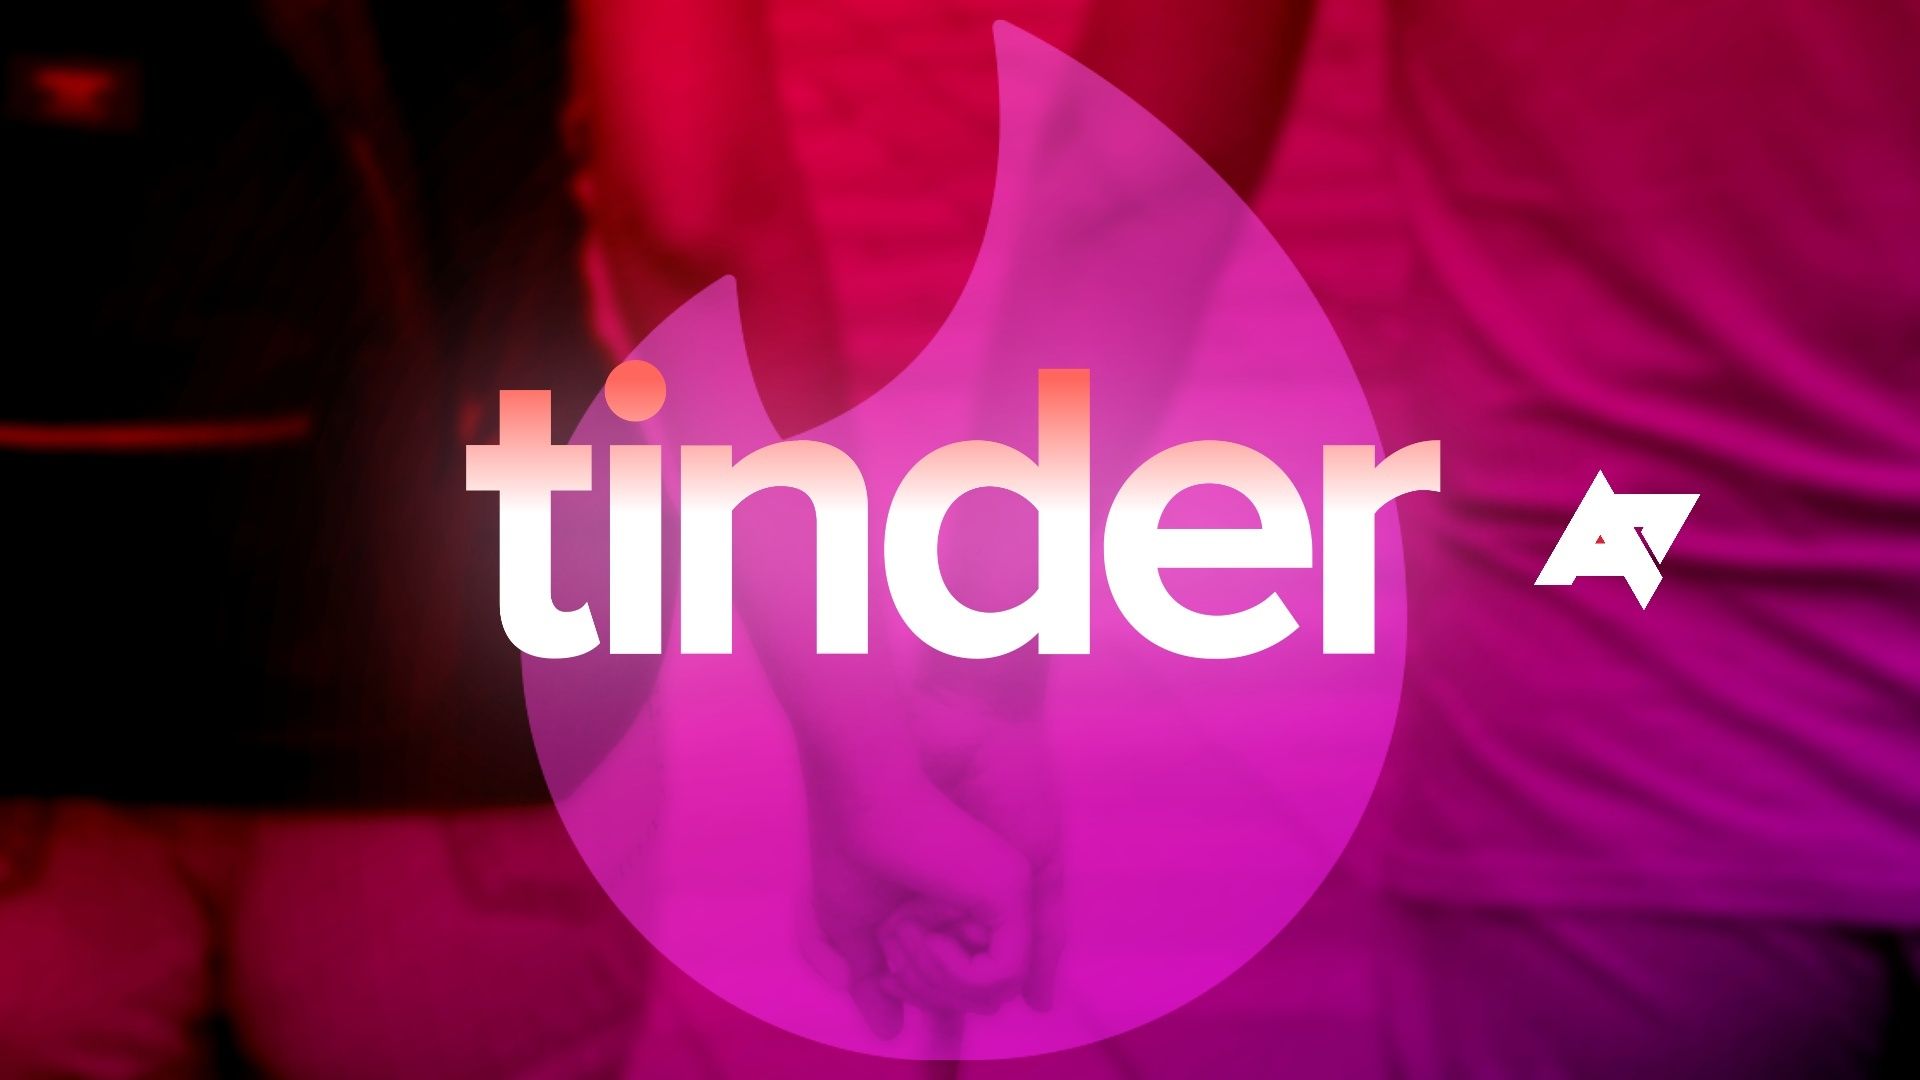 Tinder’s latest safety feature lets you share your date details with family